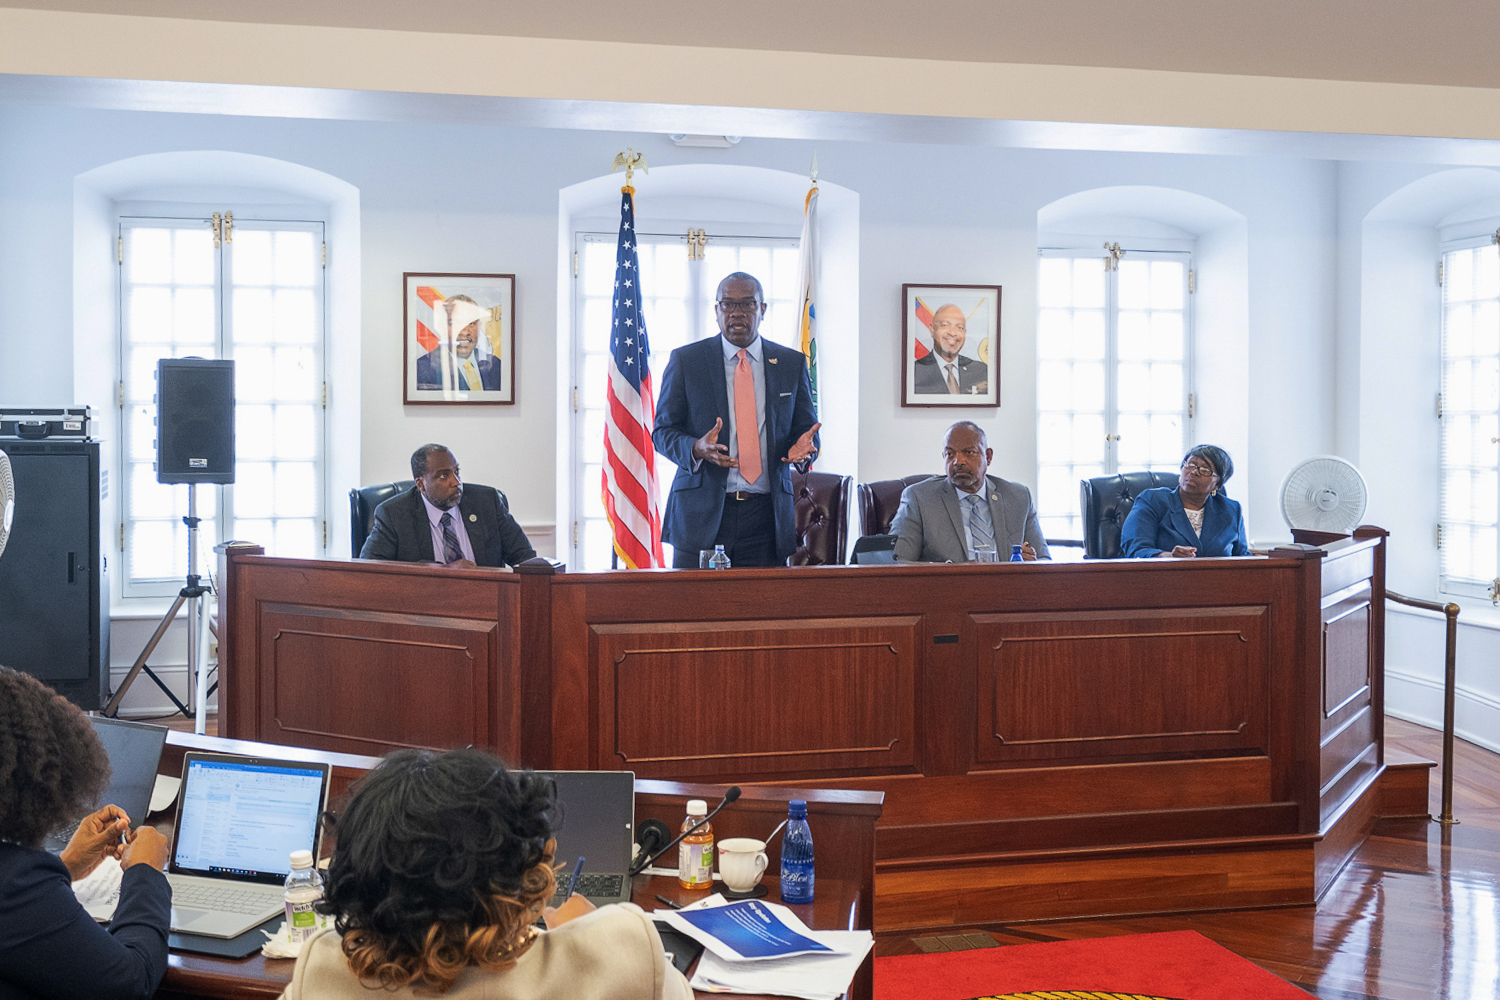 'Government Stability' The Focus of Bryan's 2nd Cabinet Meeting Over FY 2020 Budget